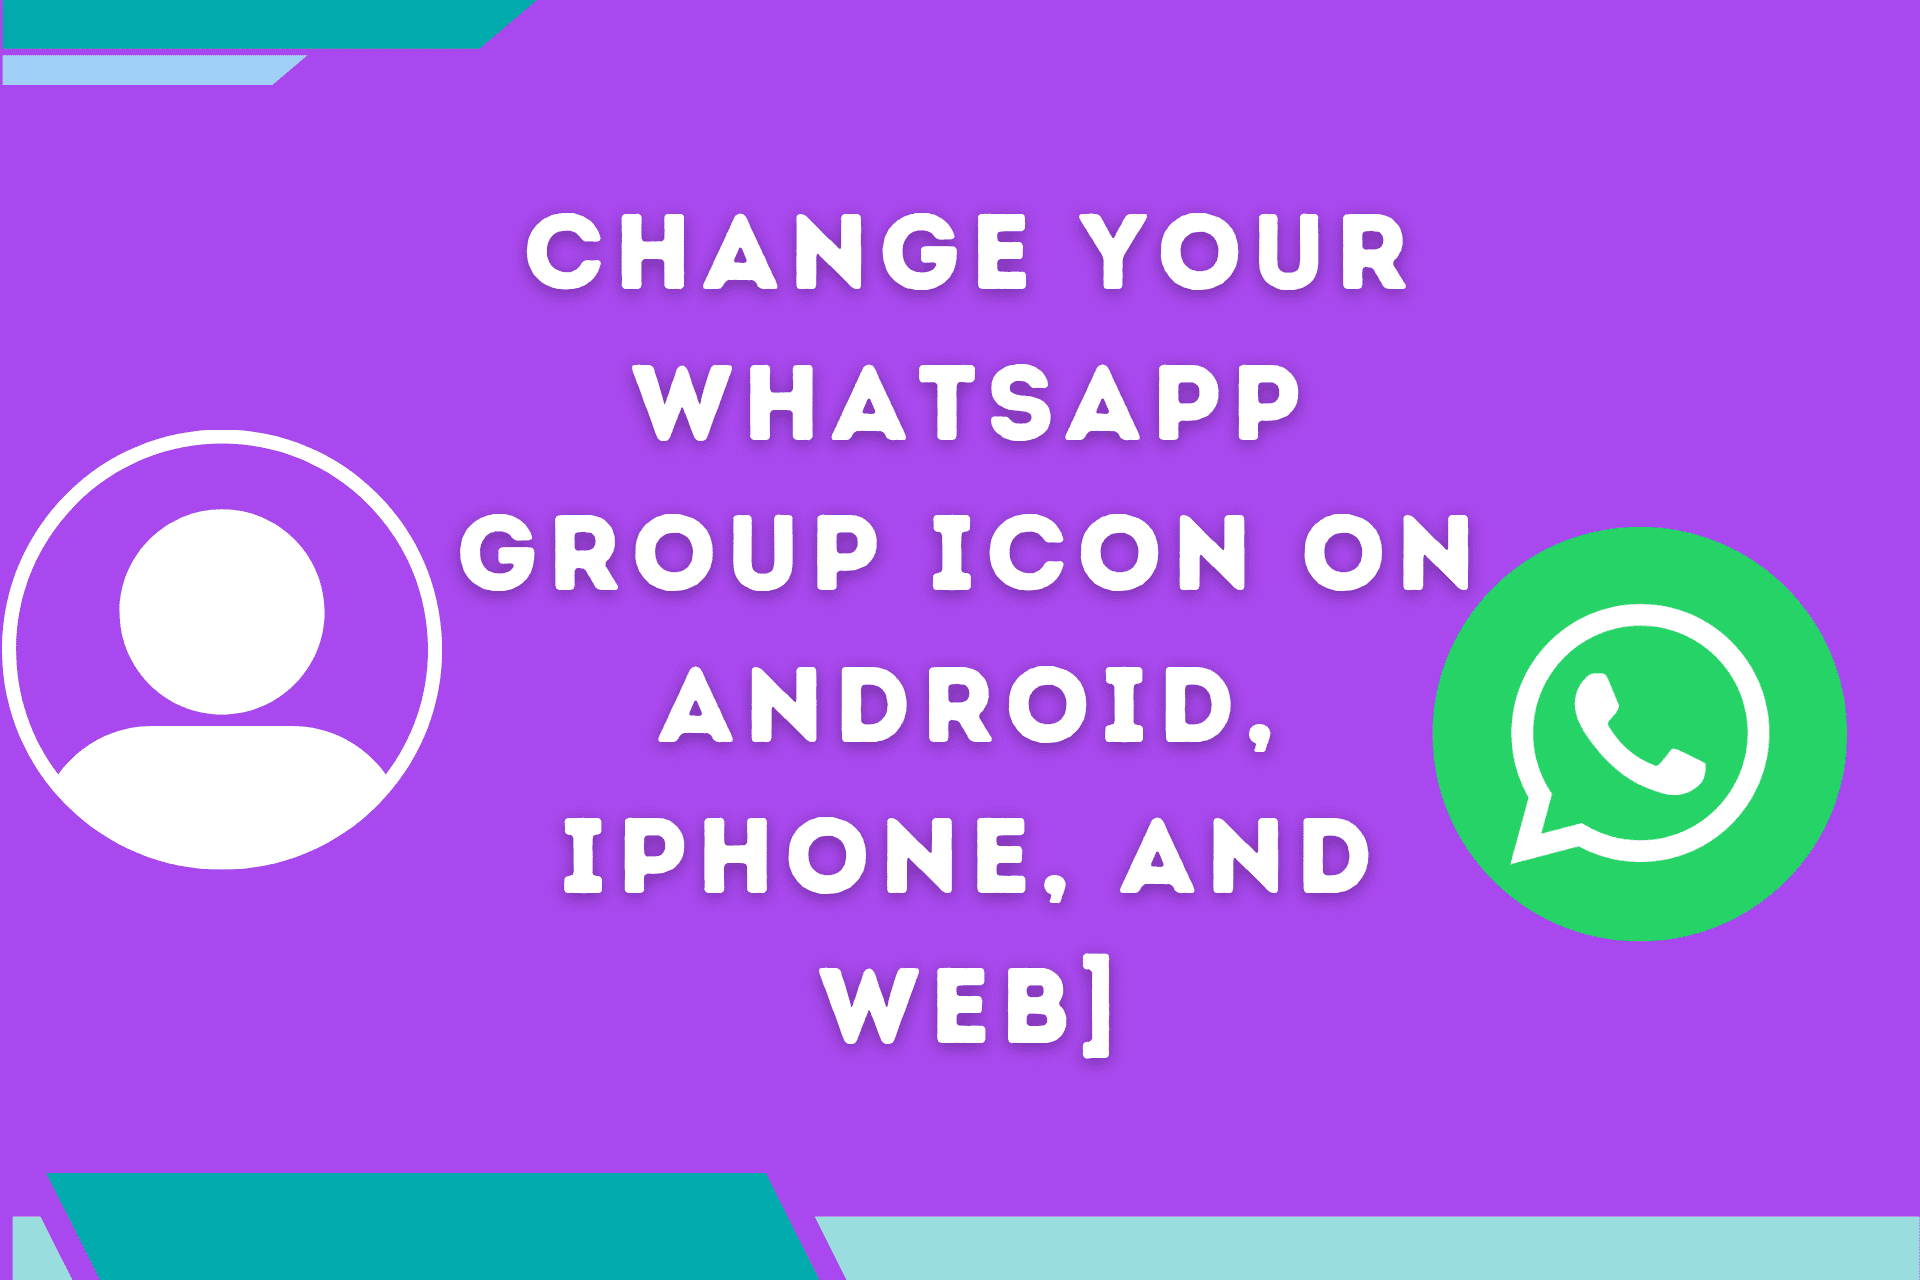 Change Your WhatsApp Group icon On Android, iPhone, and Web